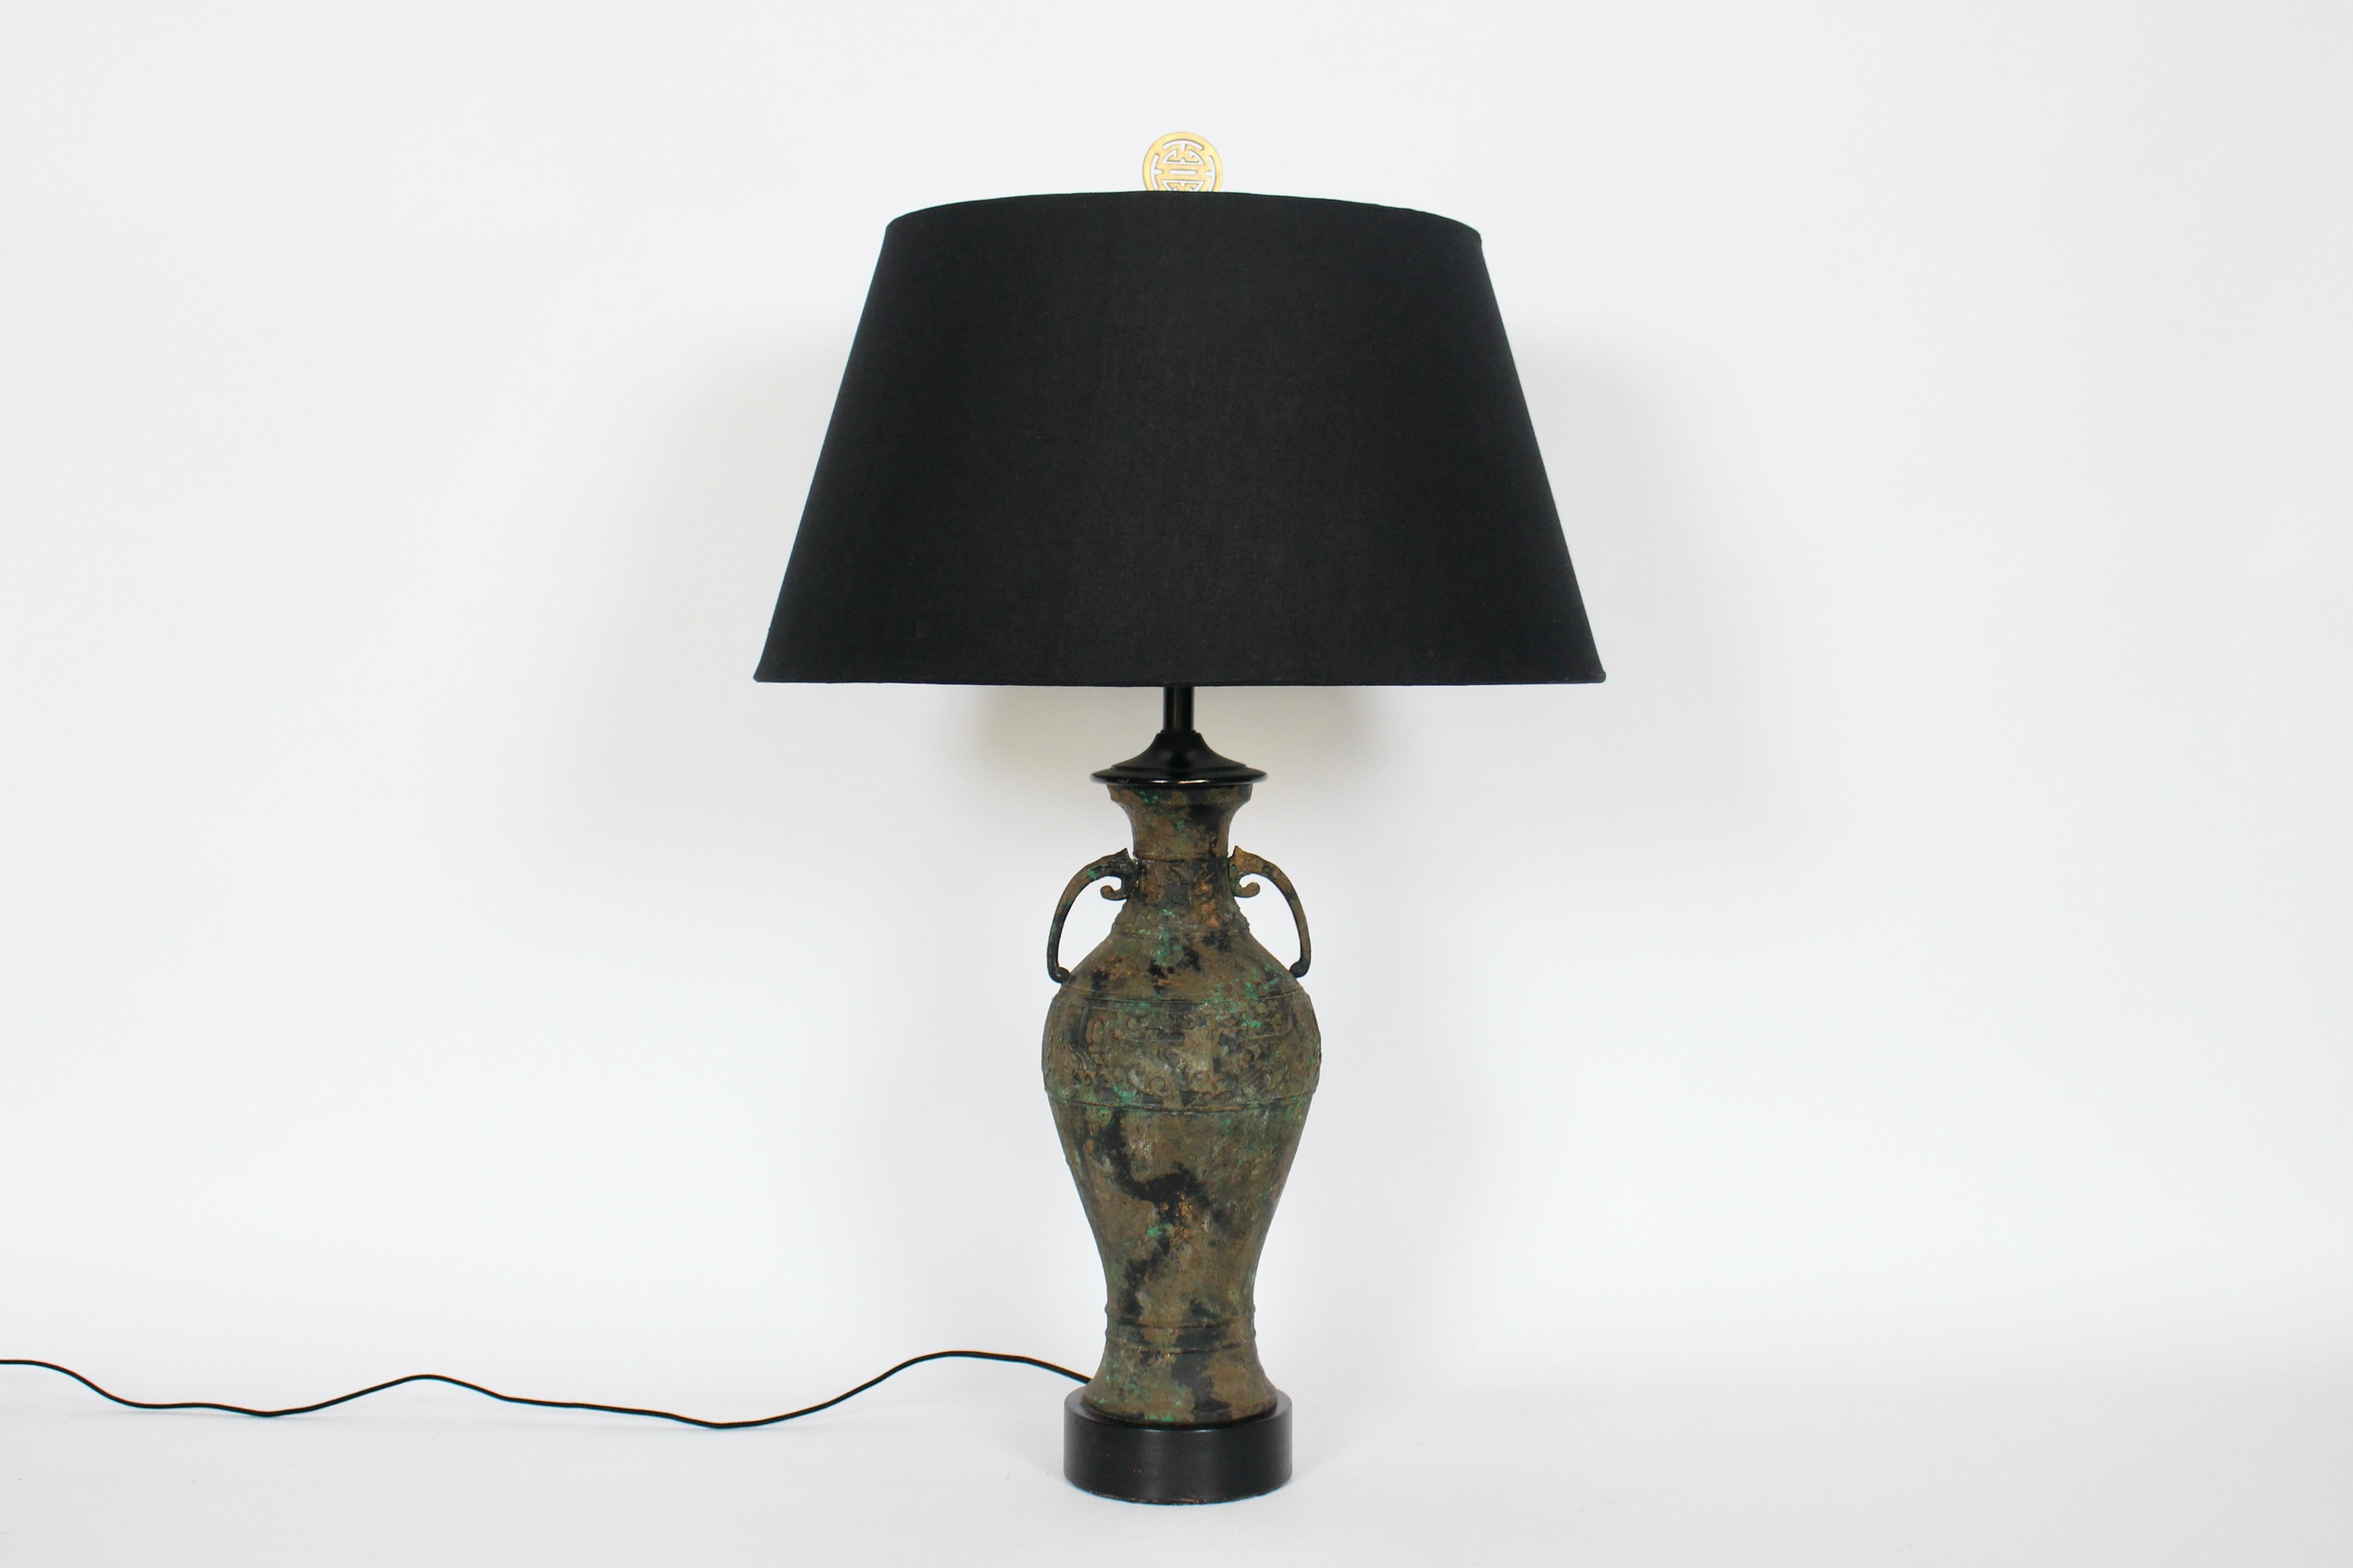 Laurel Lamp Company attributed Ancient Asian Style Cast Bronze Table Lamp. Featuring a slender handled far eastern influenced amphora form with Deep Forest Green, Gold, Bronze, Copper, Verdigris, Brass coloration. Black enameled Brass cap. Round